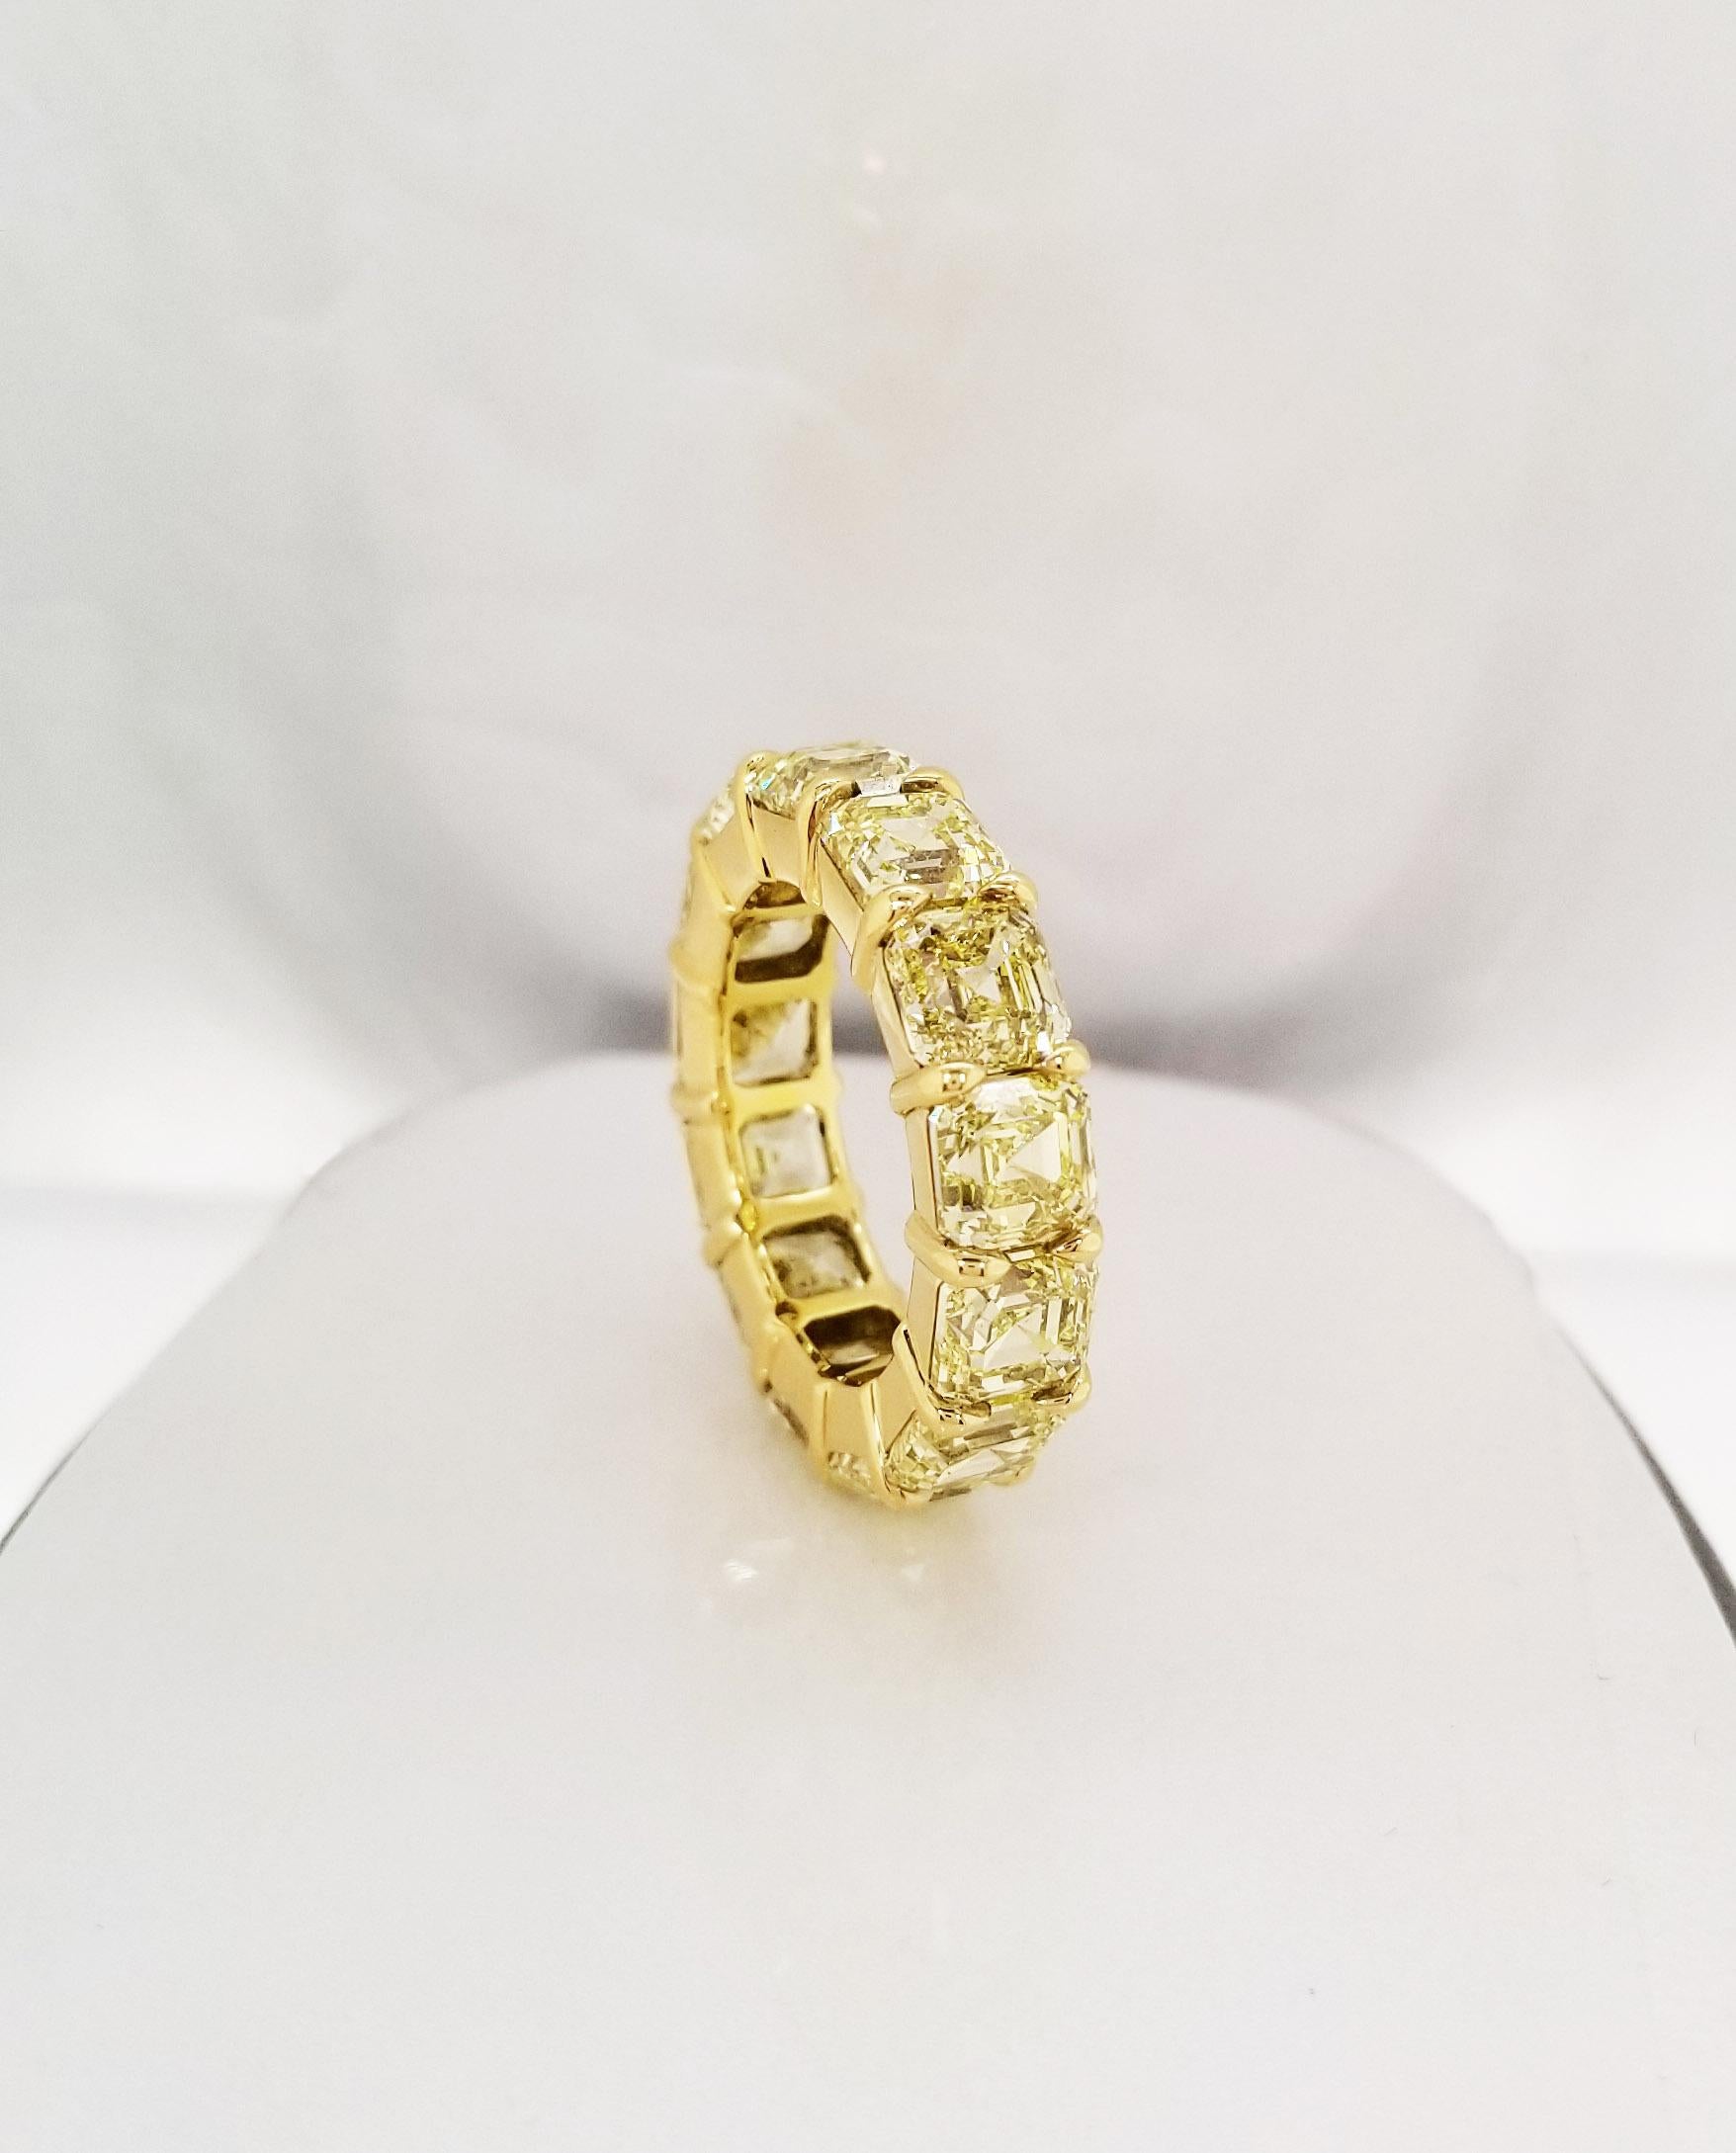 This fancy yellow Asscher Cut Eternity band is a pleasure to wear every day and contains 13.33 carats of natural fancy yellow diamonds of VVS - VS clarity in 18 karat yellow gold. Each diamond has a GIA grading certificate (13 stones certified).